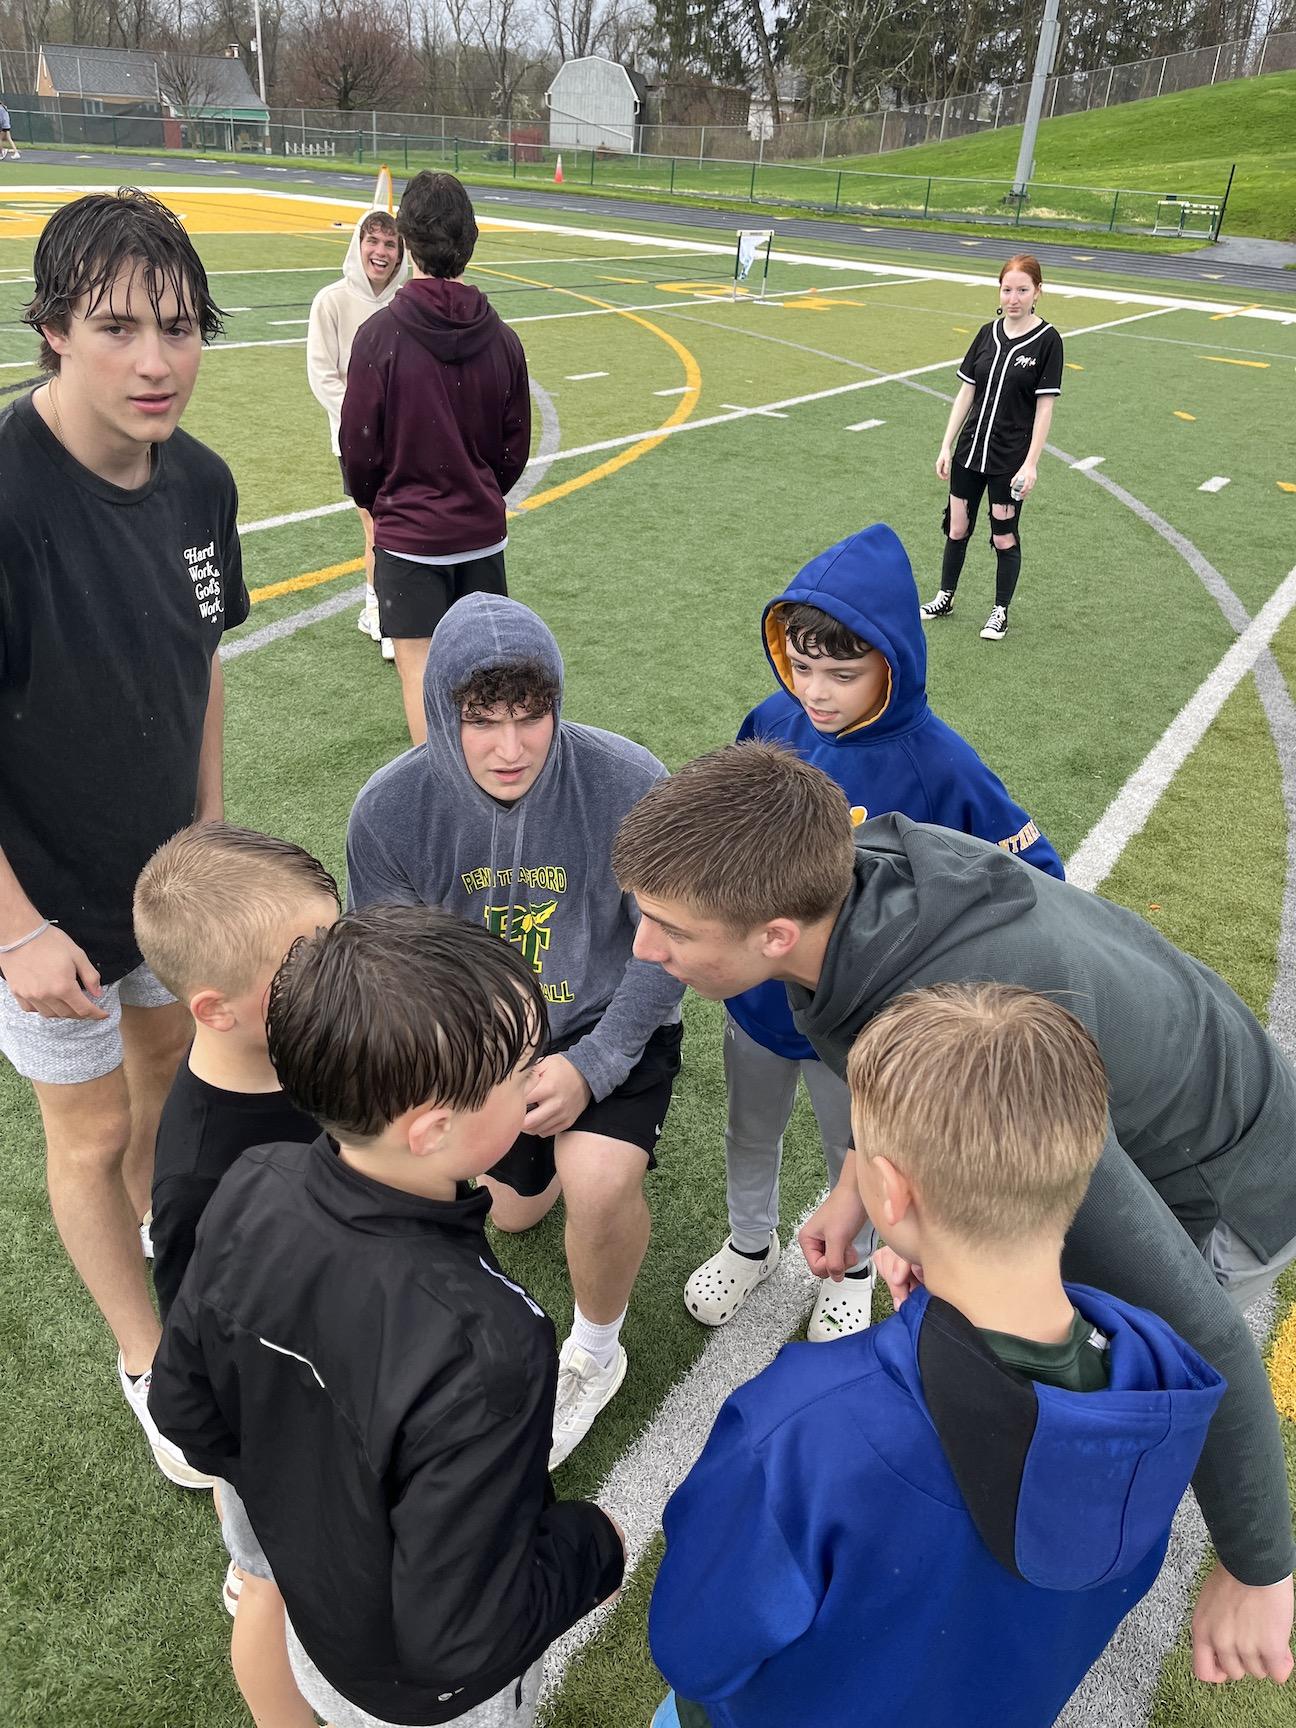 Junior Jack Weishaar (center) discusses a football play with his little brother Ryan Weishaar and friends Kellan Kiste, Nico Sterner, and Eli Hodge